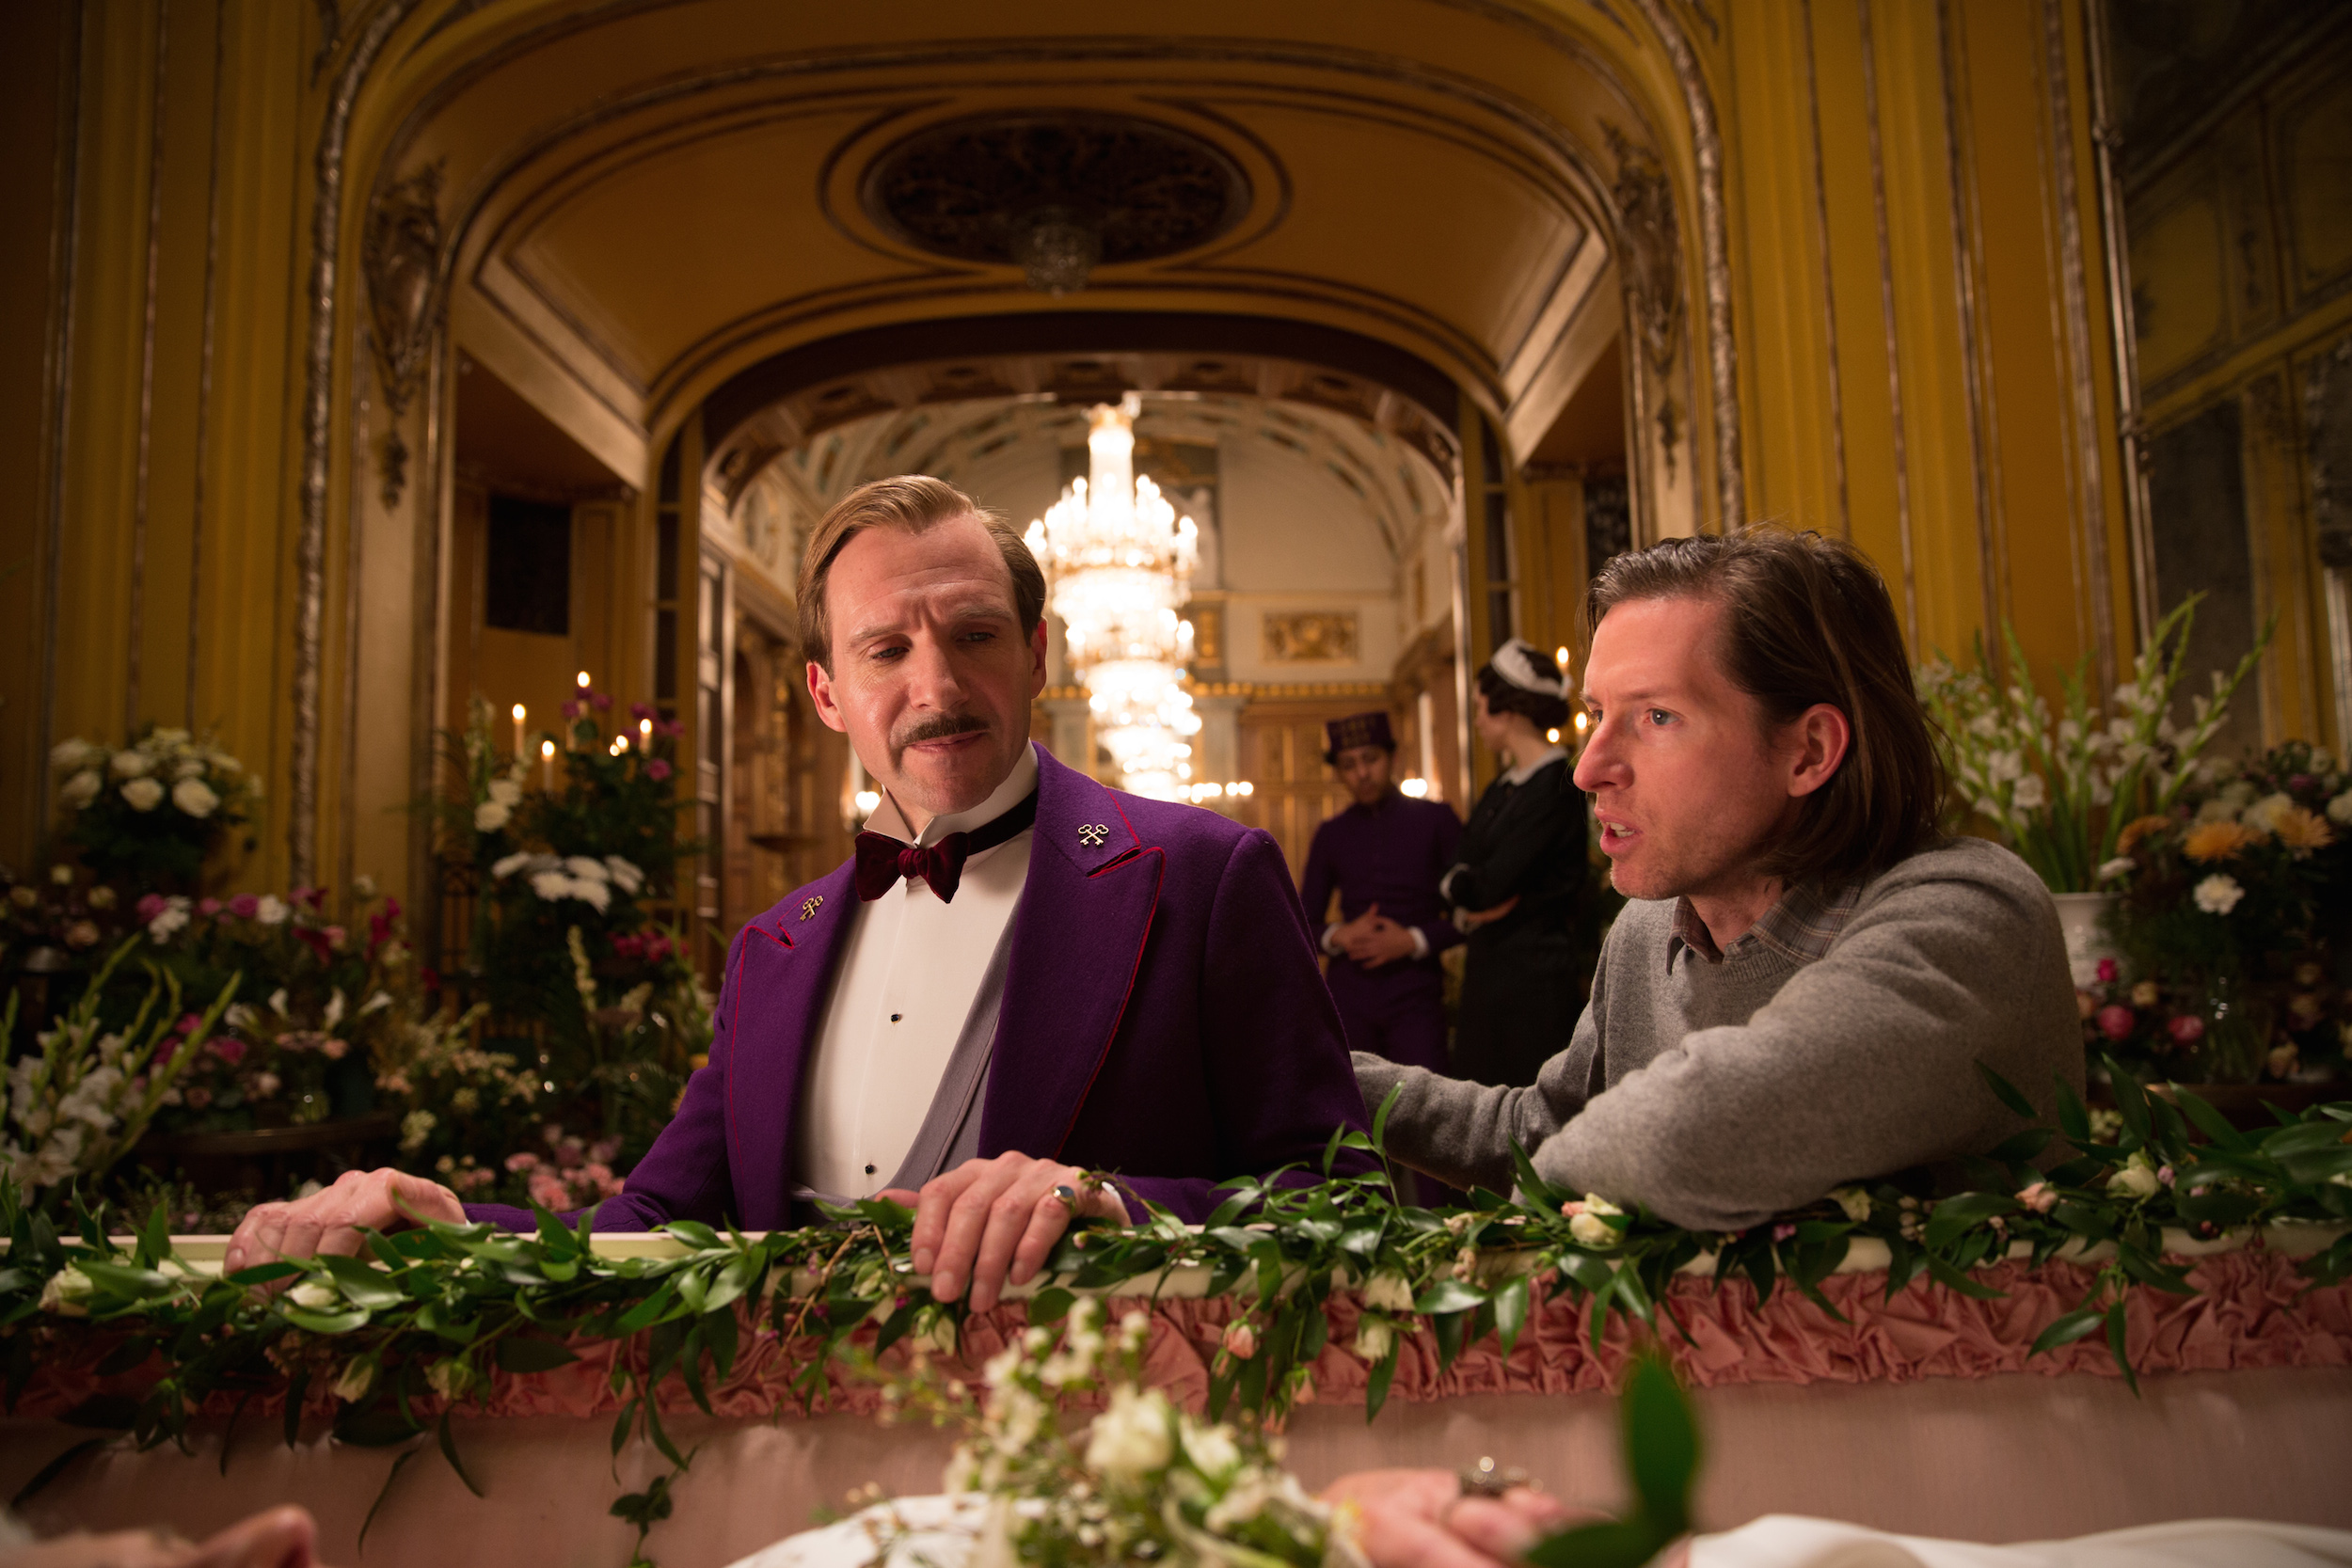 Anderson (right) directs Fiennes in The Grand Budapest Hotel.